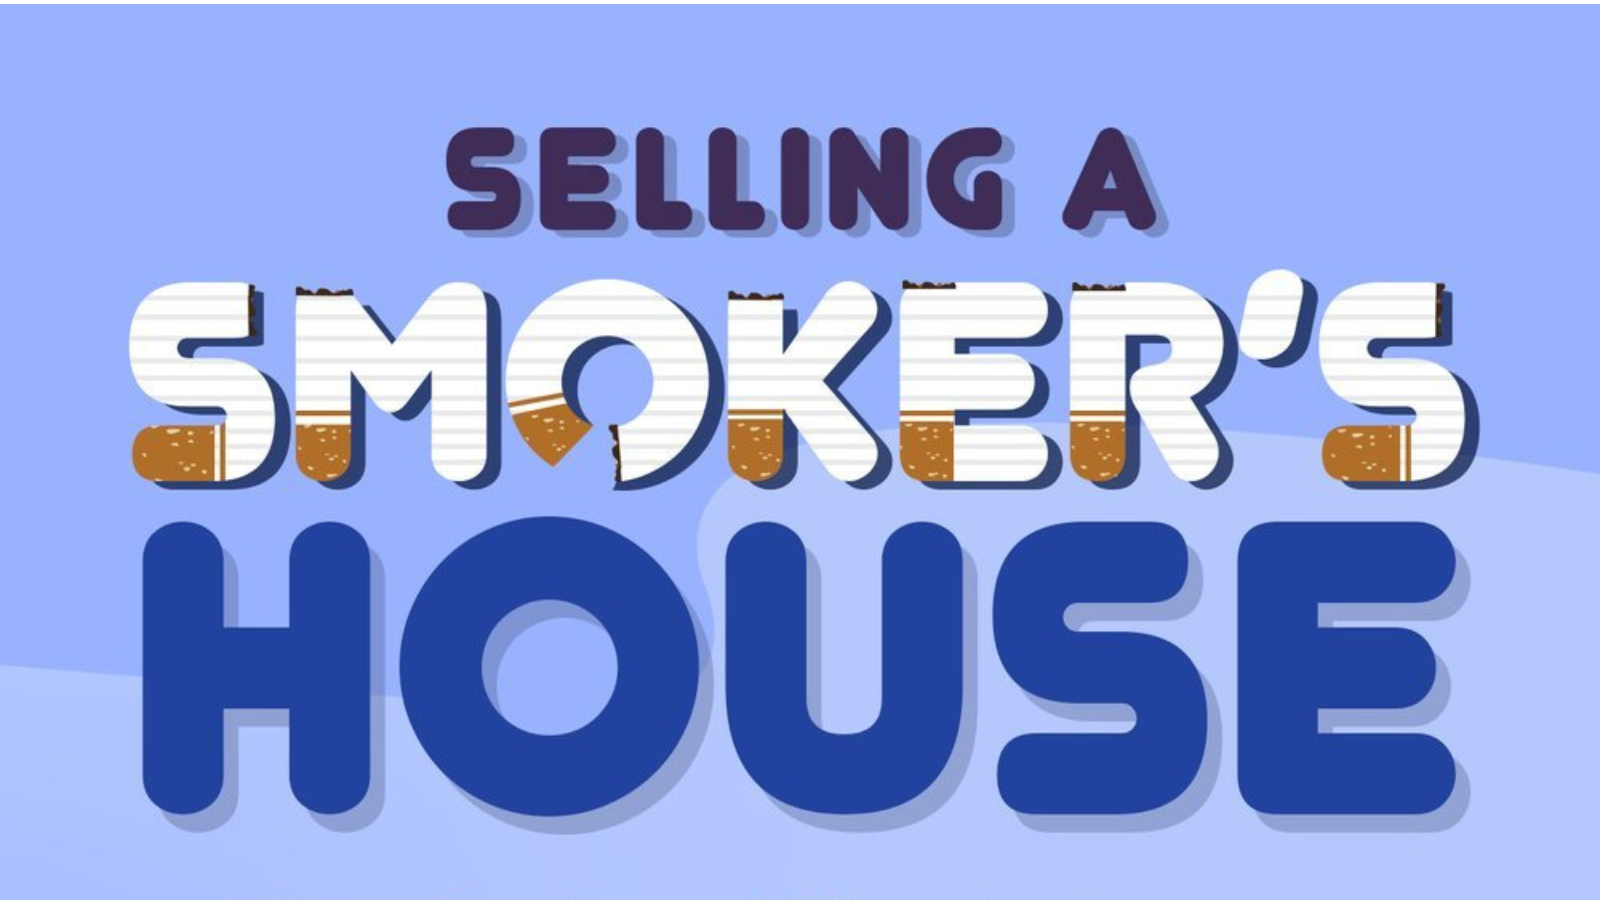 Selling A Smoker's House? Here Are Expert Ways to Remove Cigarette Smell for Better Resale